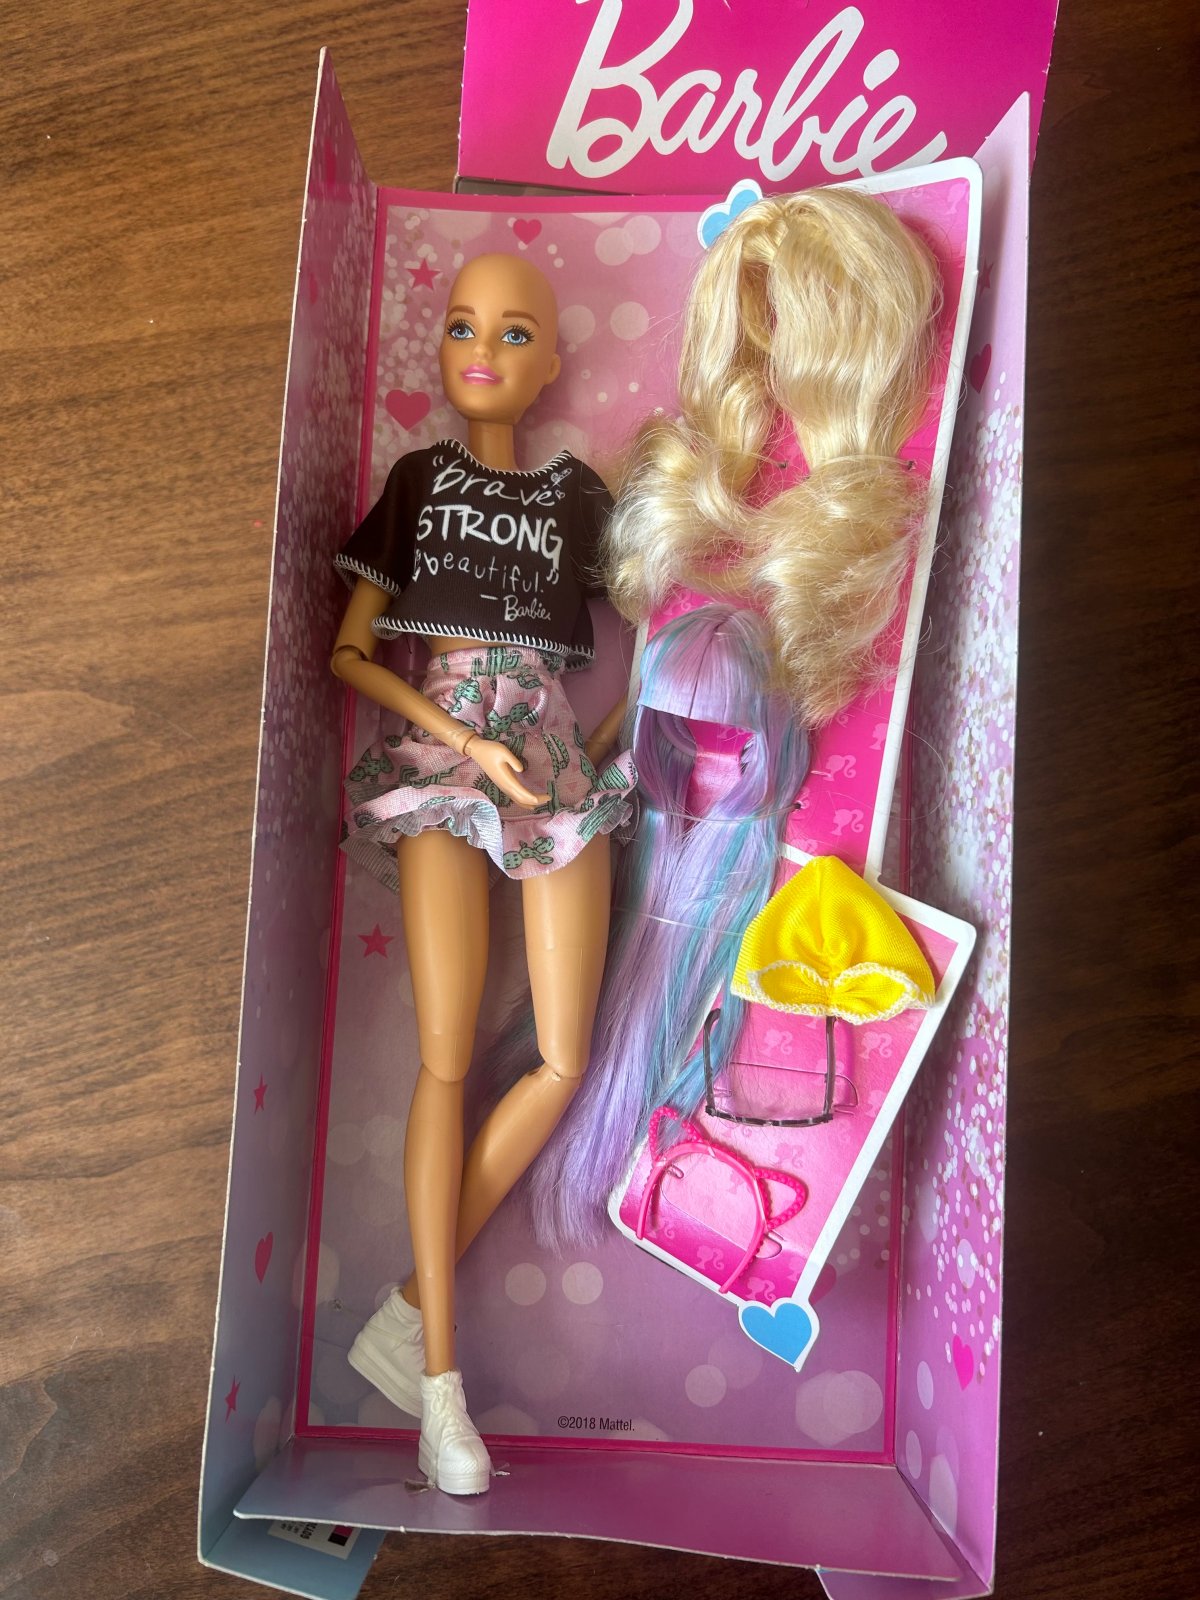 COMMENTARY: I owe Barbie so much credit for my breast cancer healing, and I  had no idea - National